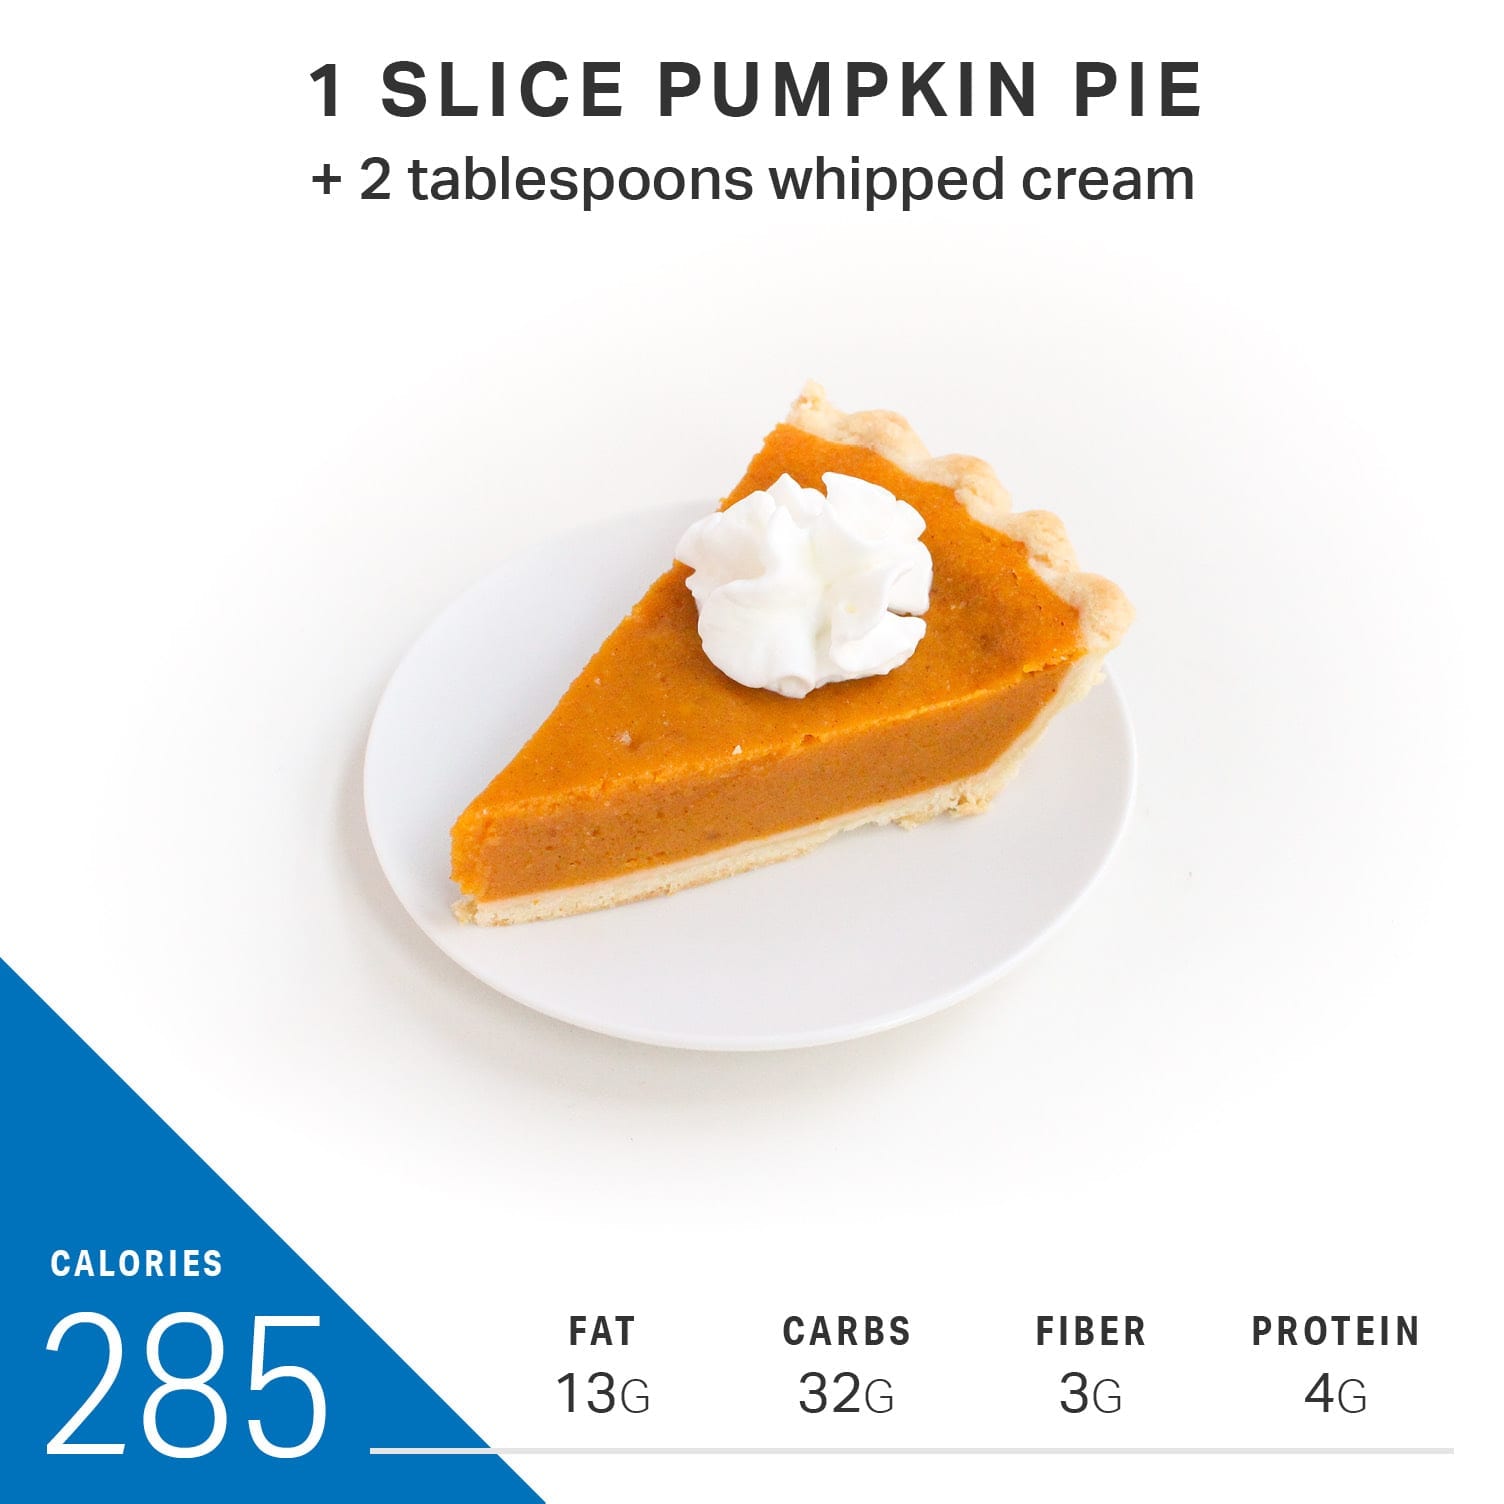 1 slice pumpkin pie plus 2 tablespoons whipped cream